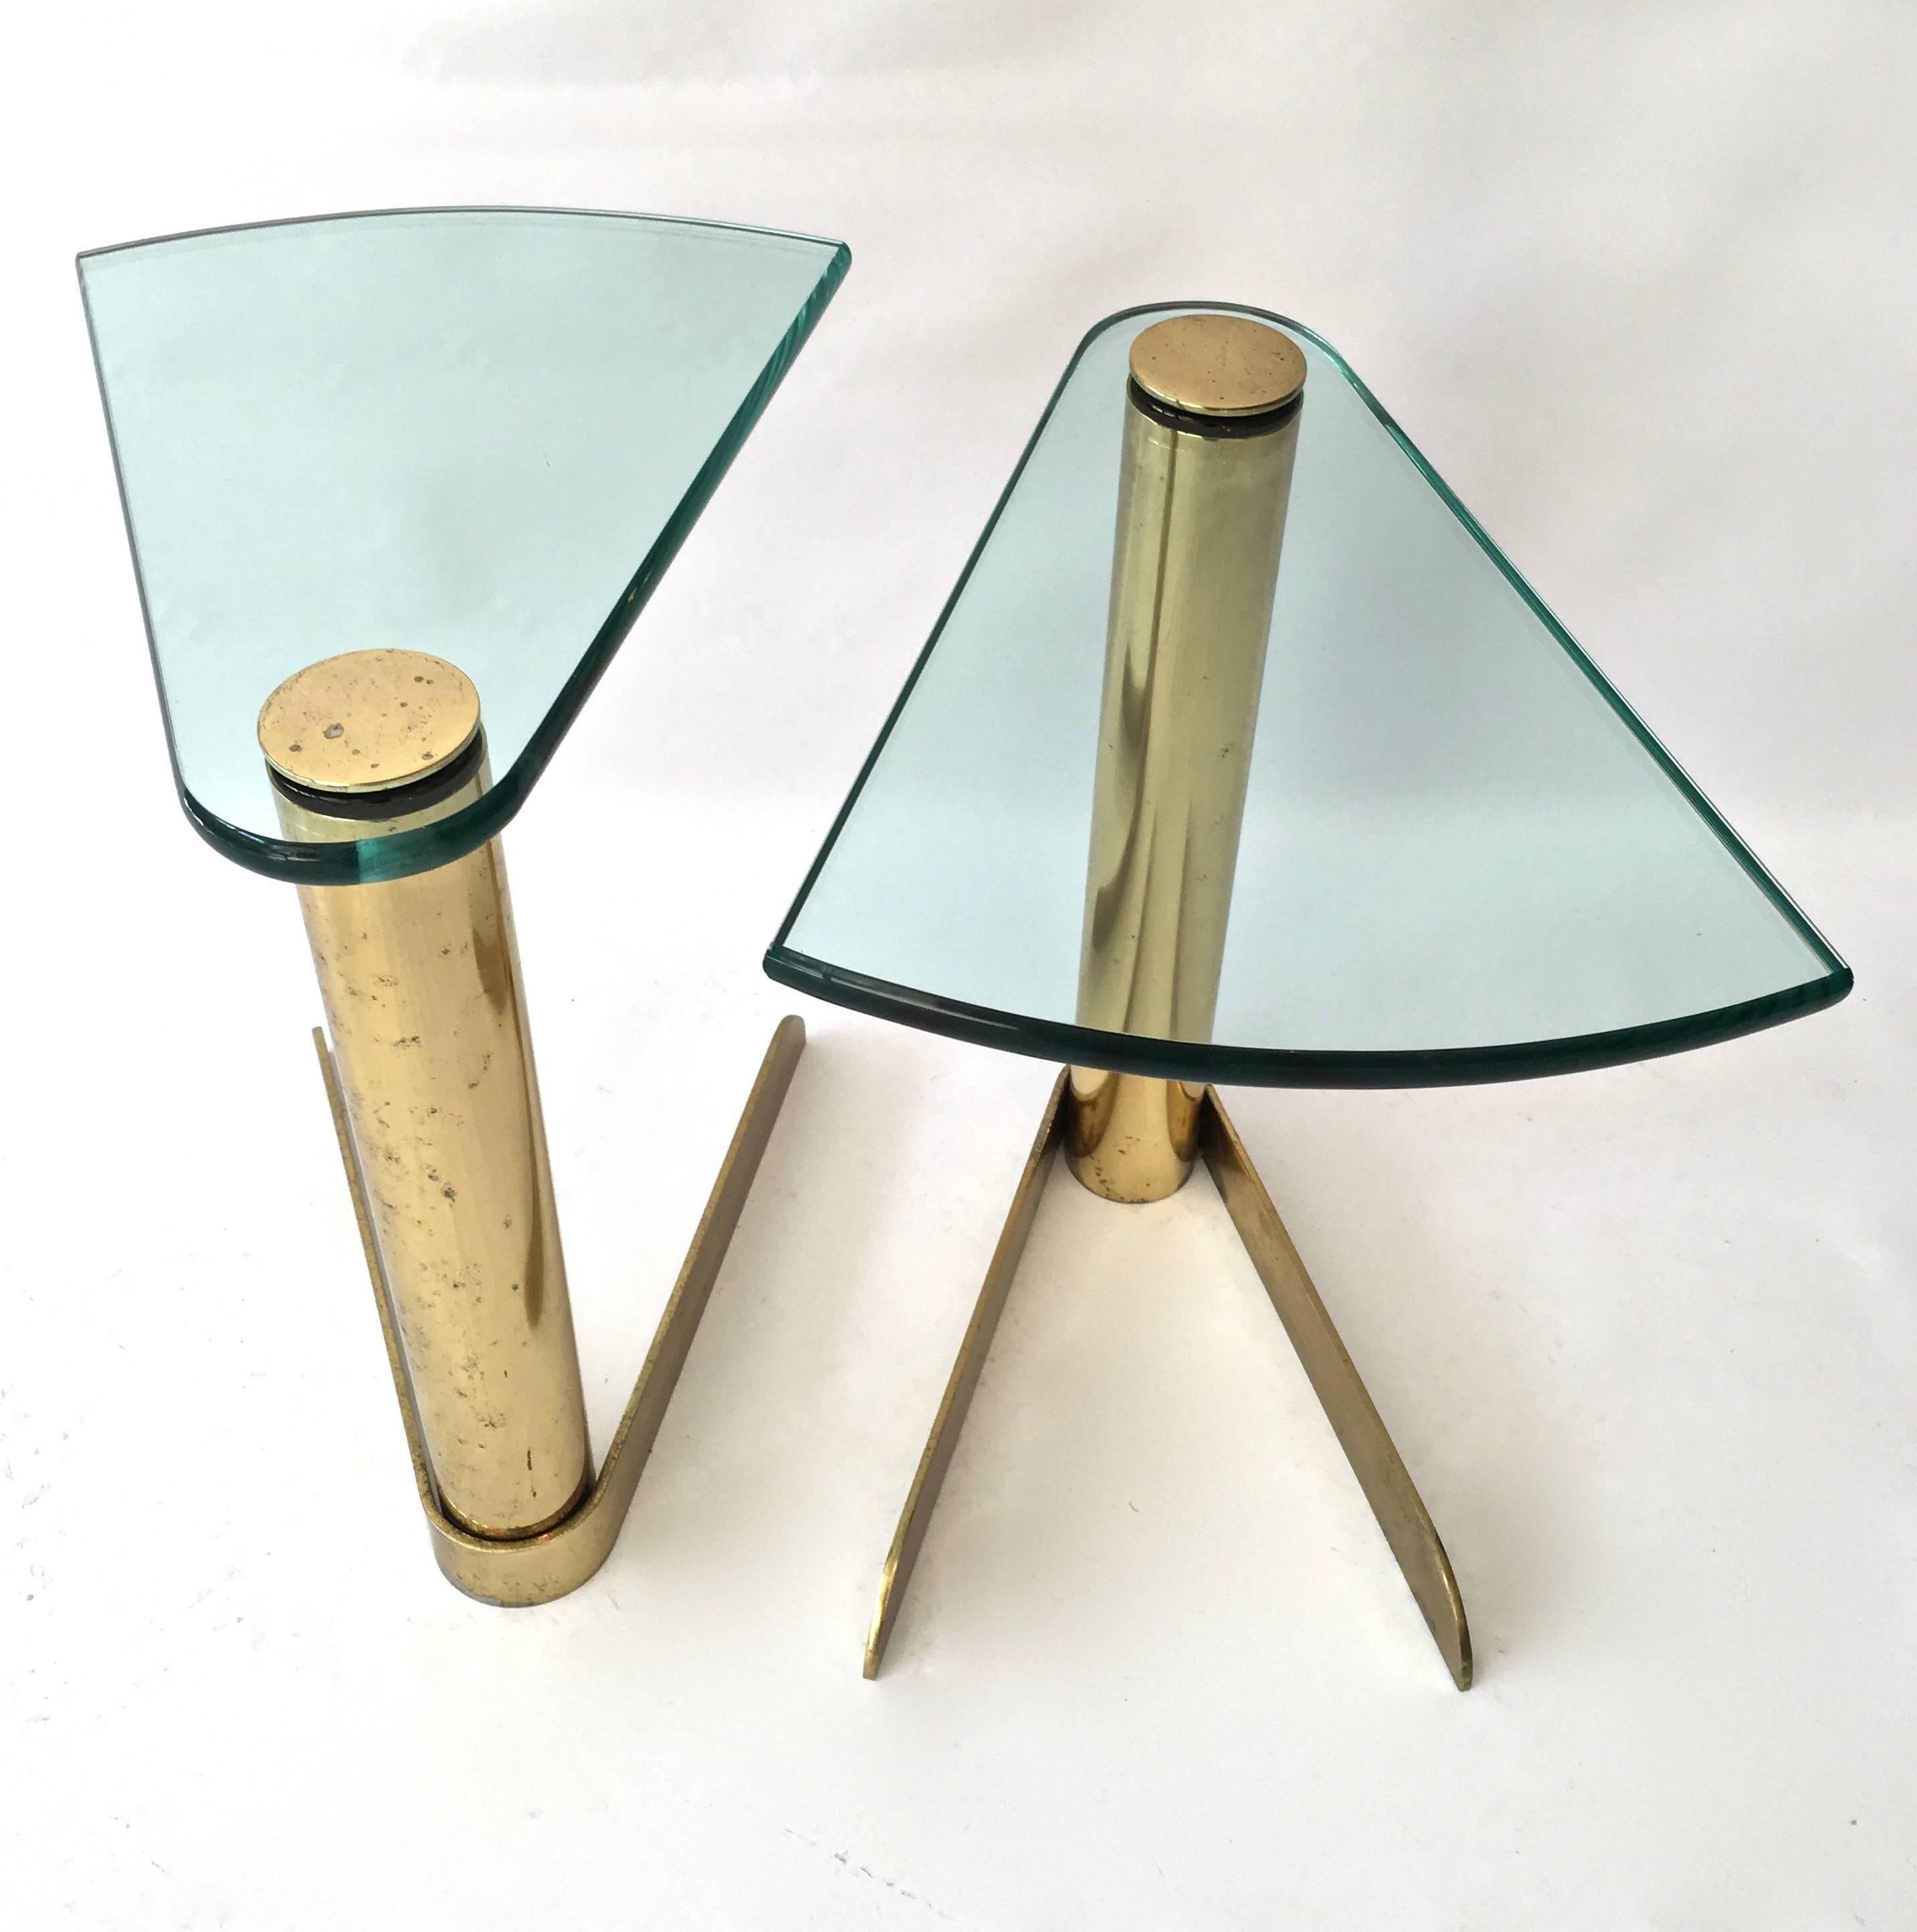 Polished Pair of Brass and Glass Side or Drinks Tables by Pace Collection